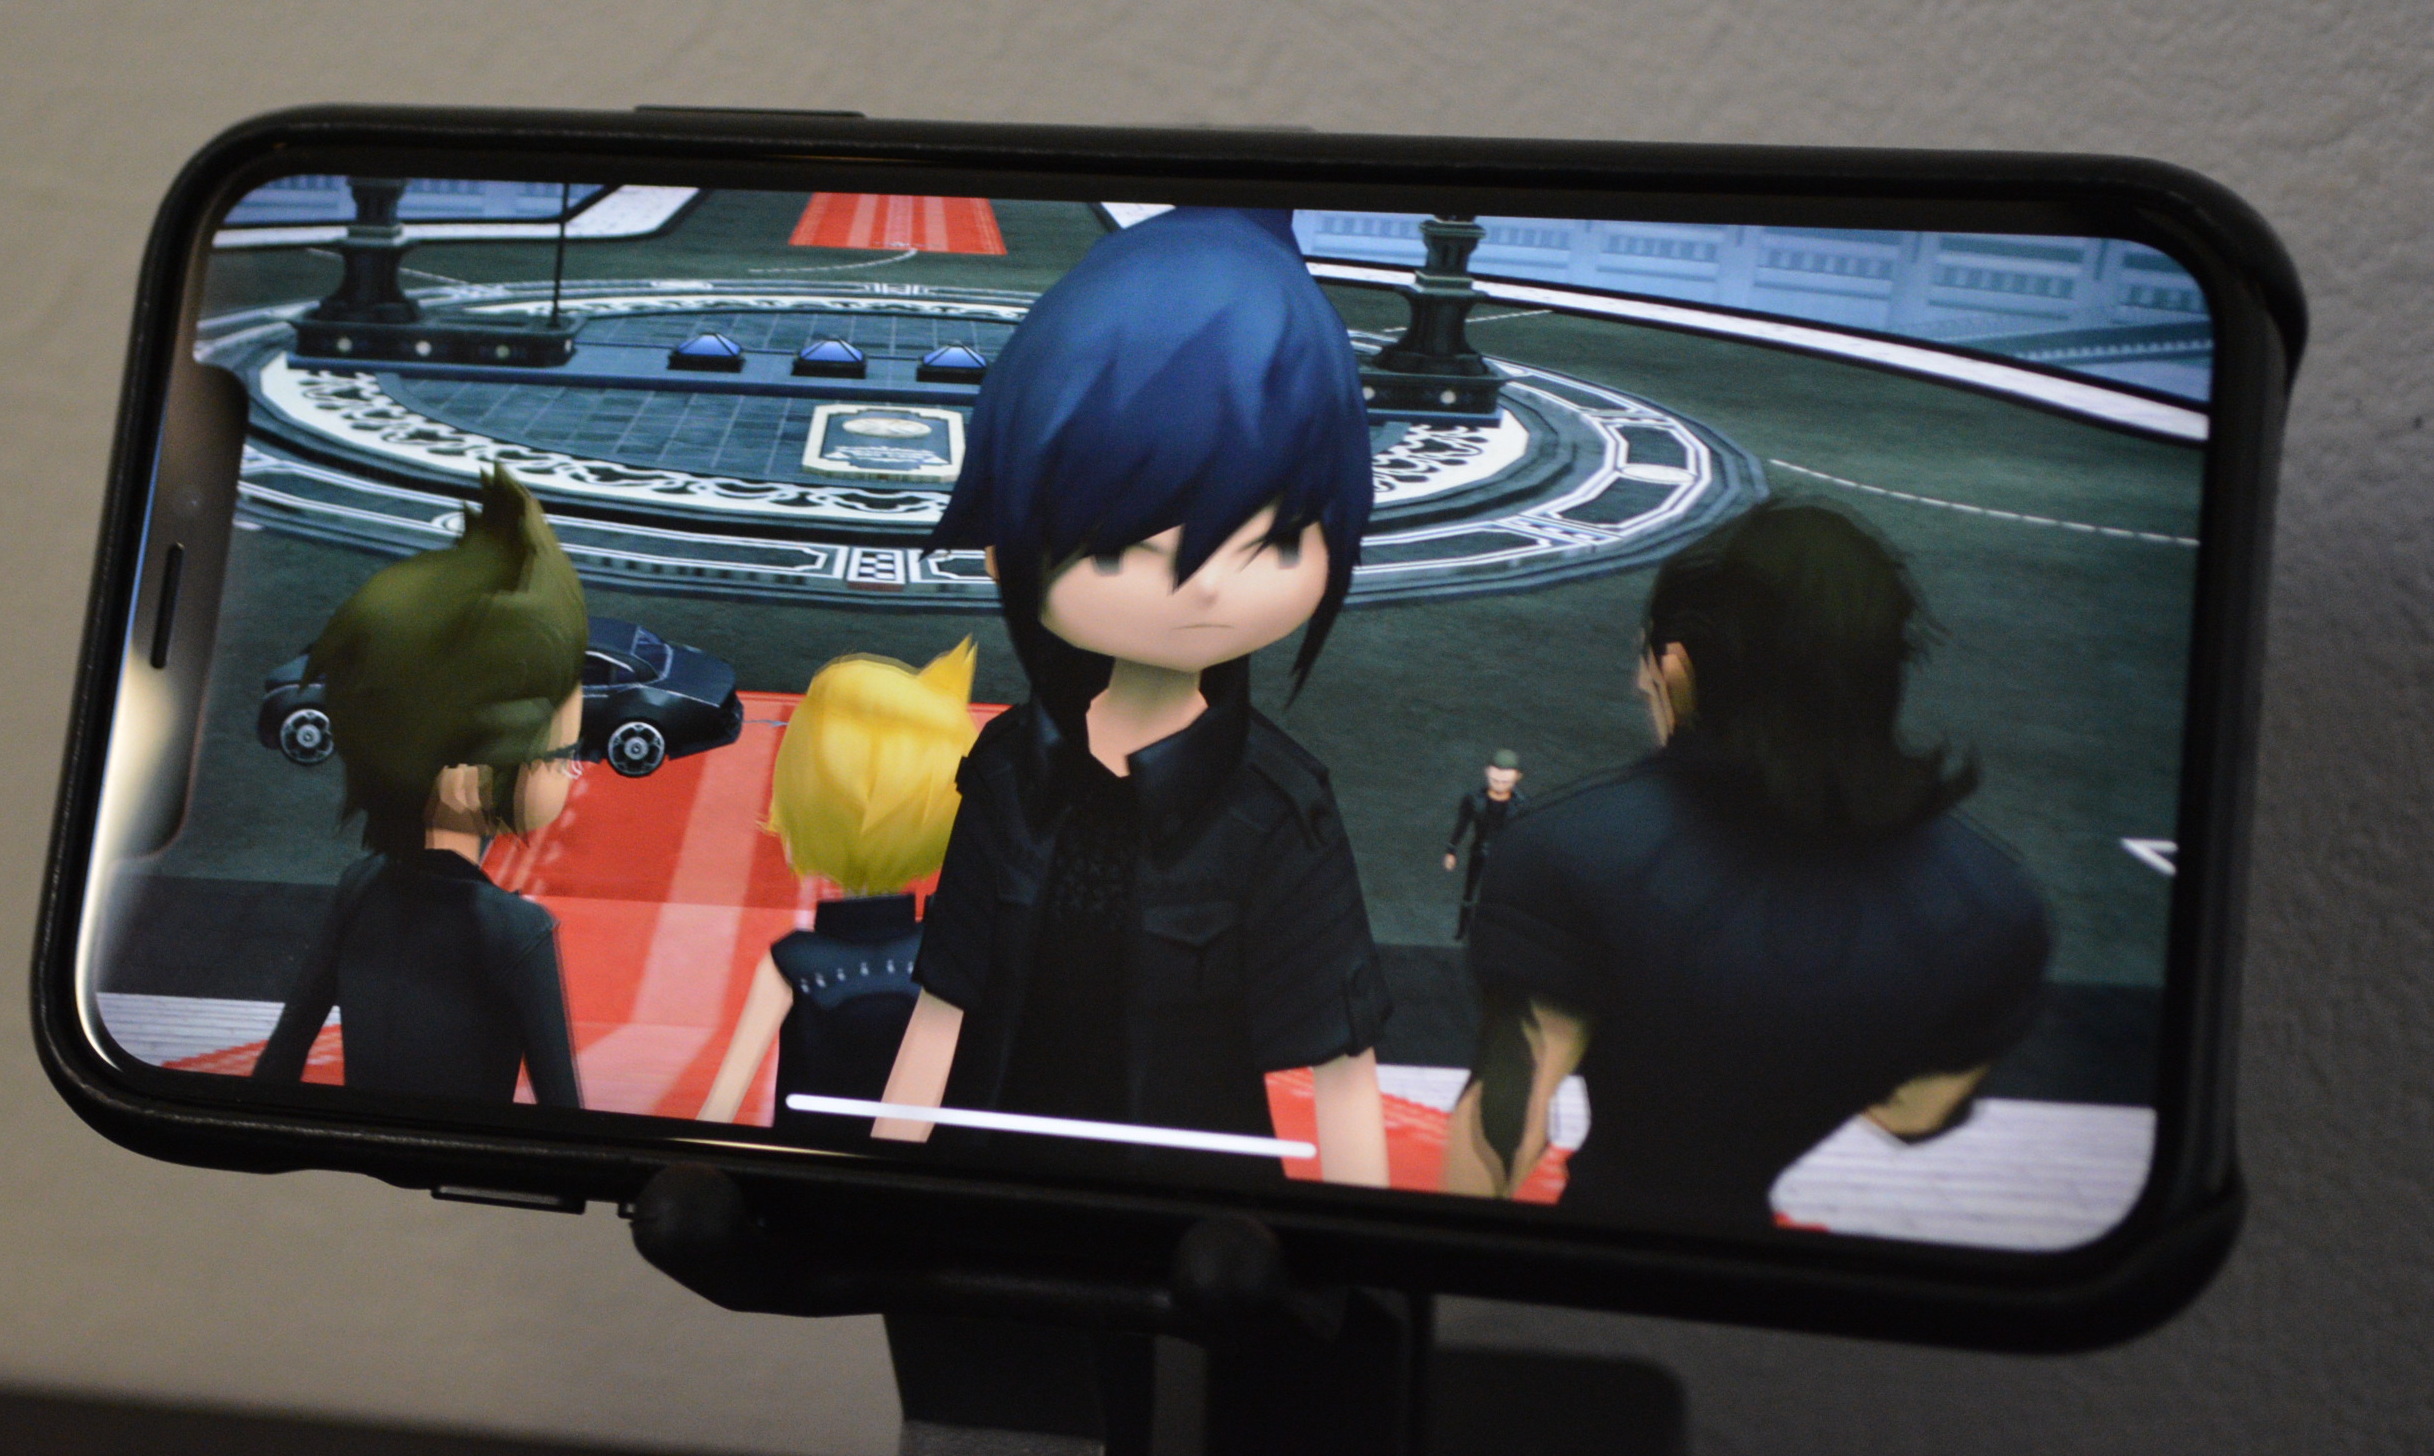 ios-ff15-pocket-edition-is-now-available-1